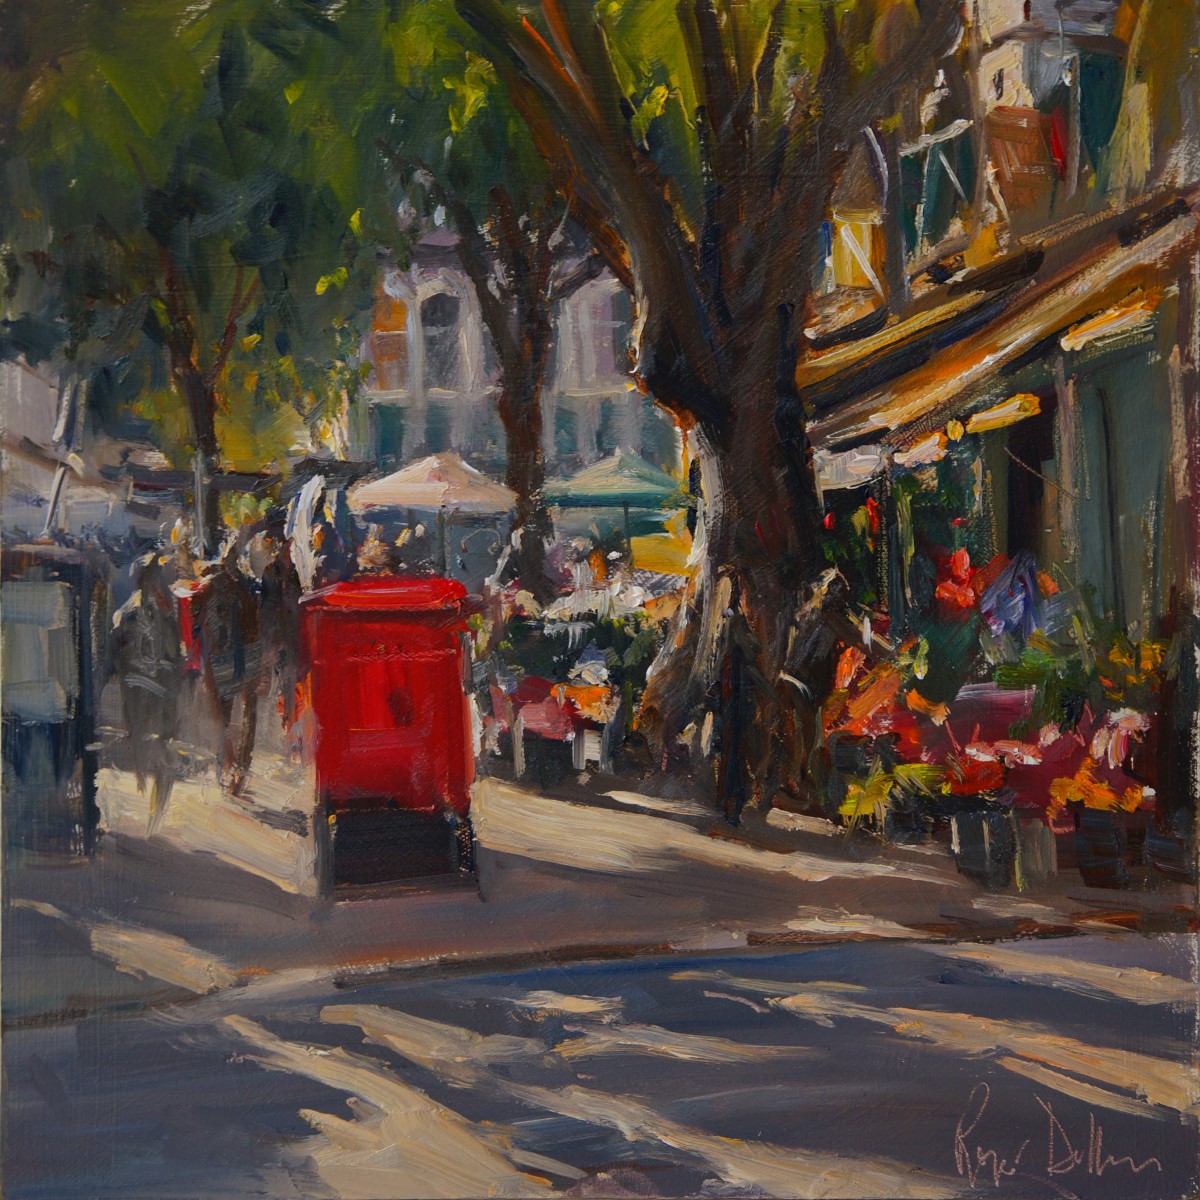 Artist Roger Dellar, 'Light Coming Through the Market', Norwich Market, Oil, 12x12in, £500. Paint Out Norwich 2018